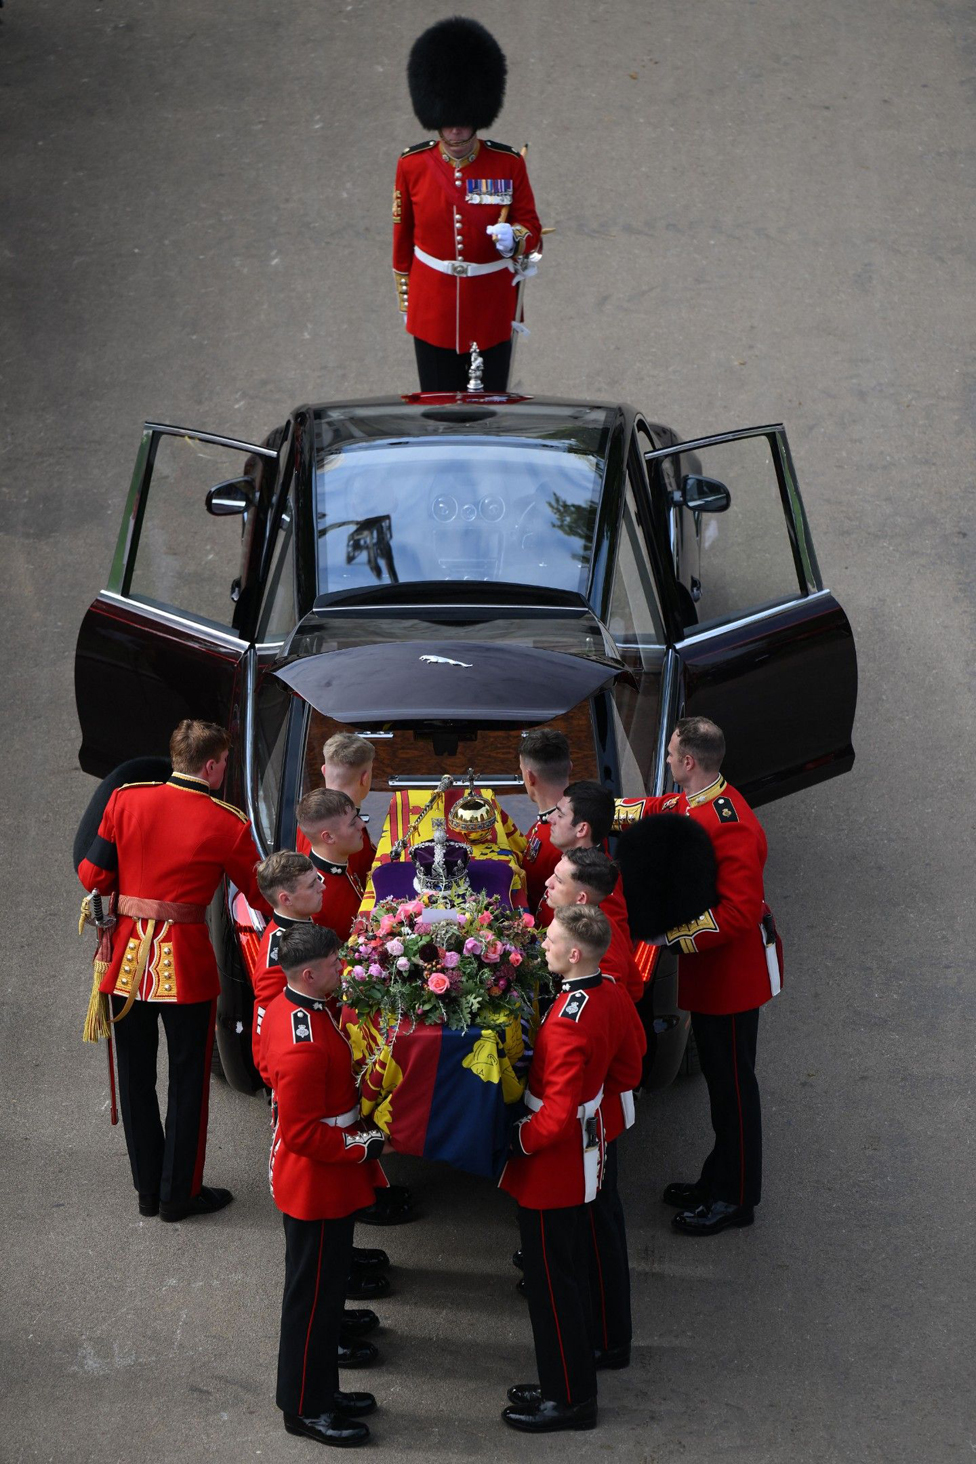 The Queen's coffin is placed into the hearse, ready for the journey to Windsor.